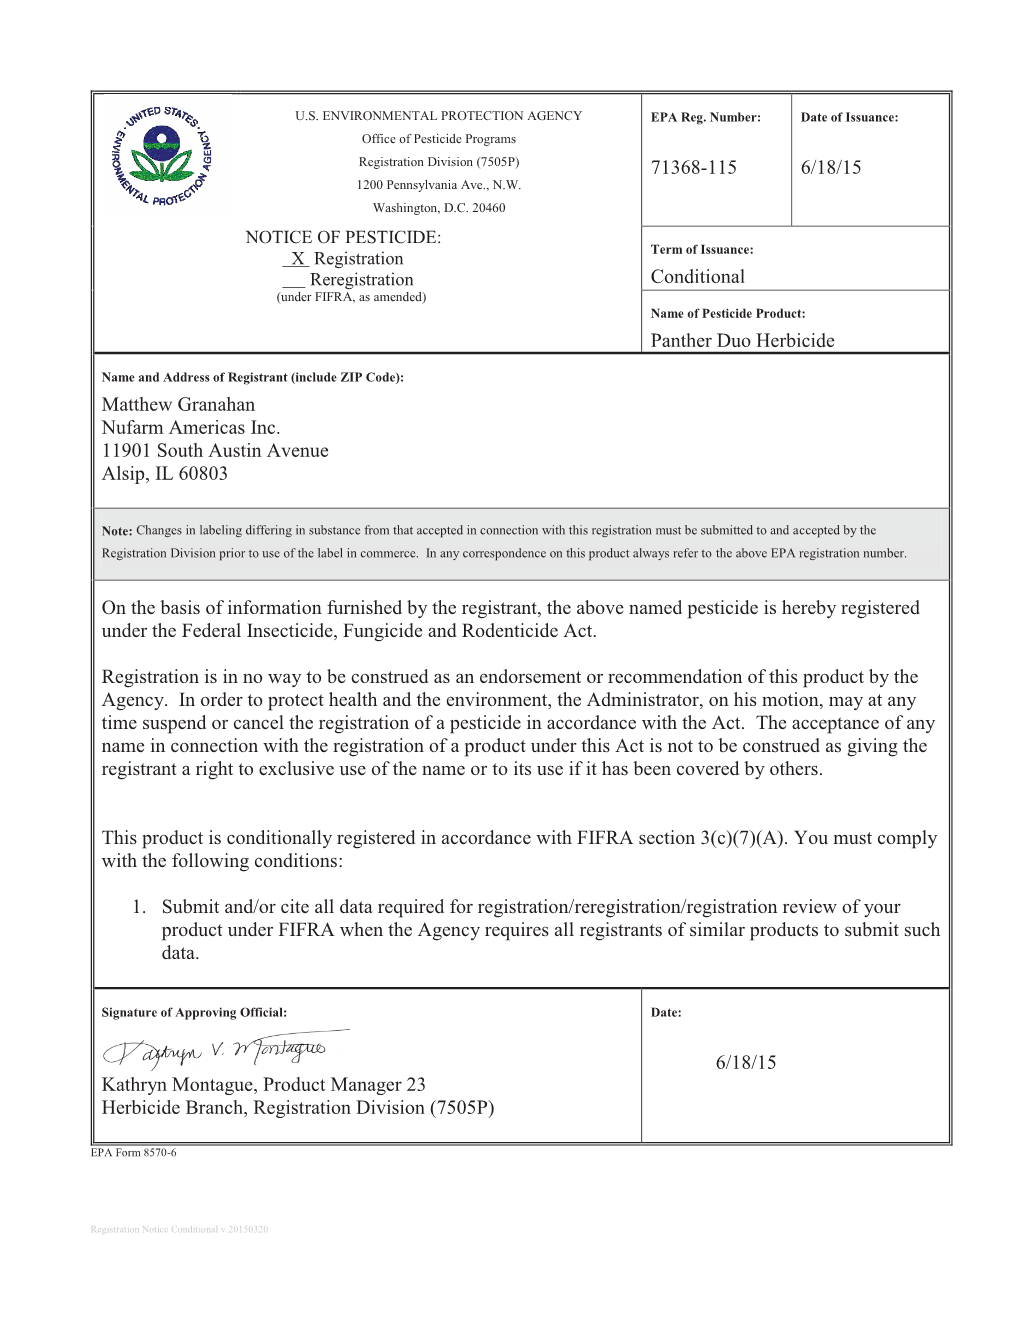 US EPA, Pesticide Product Label, Panther Duo Herbicide,06/18/2015